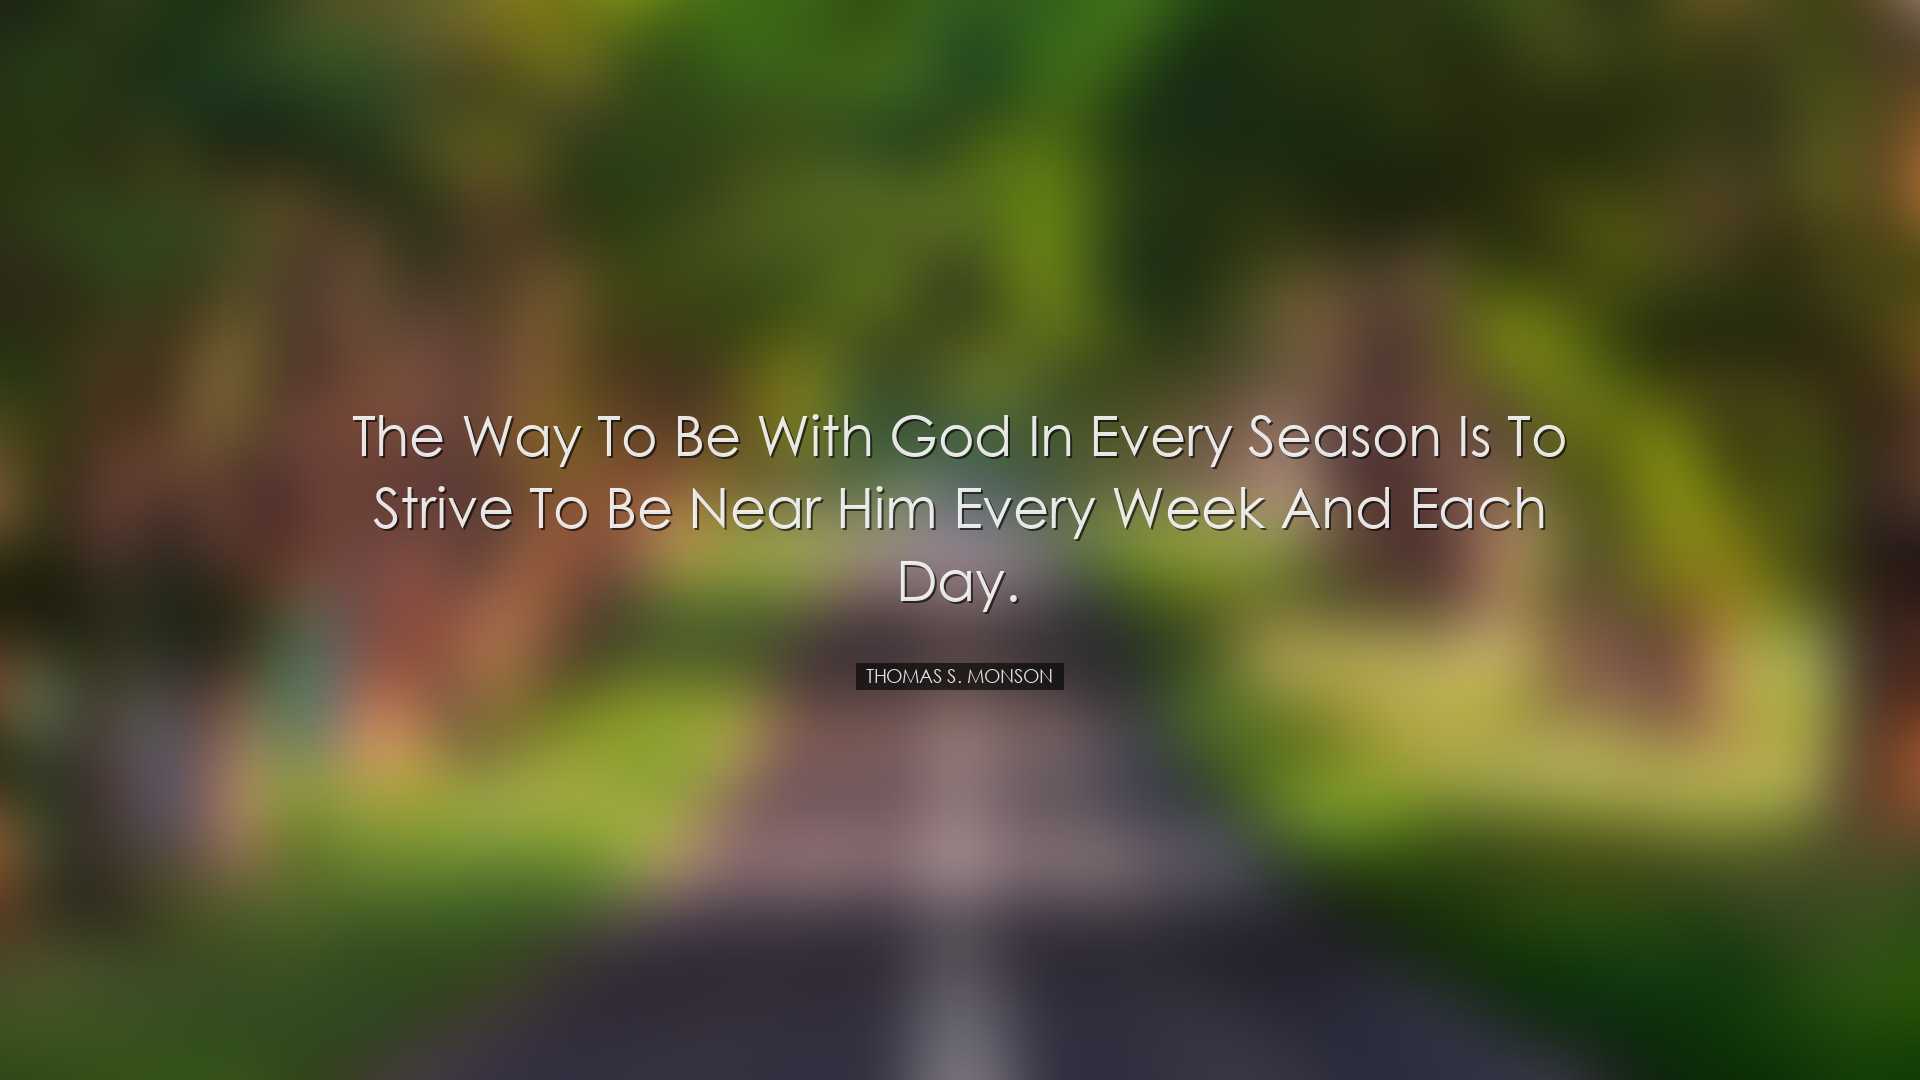 The way to be with God in every season is to strive to be near Him